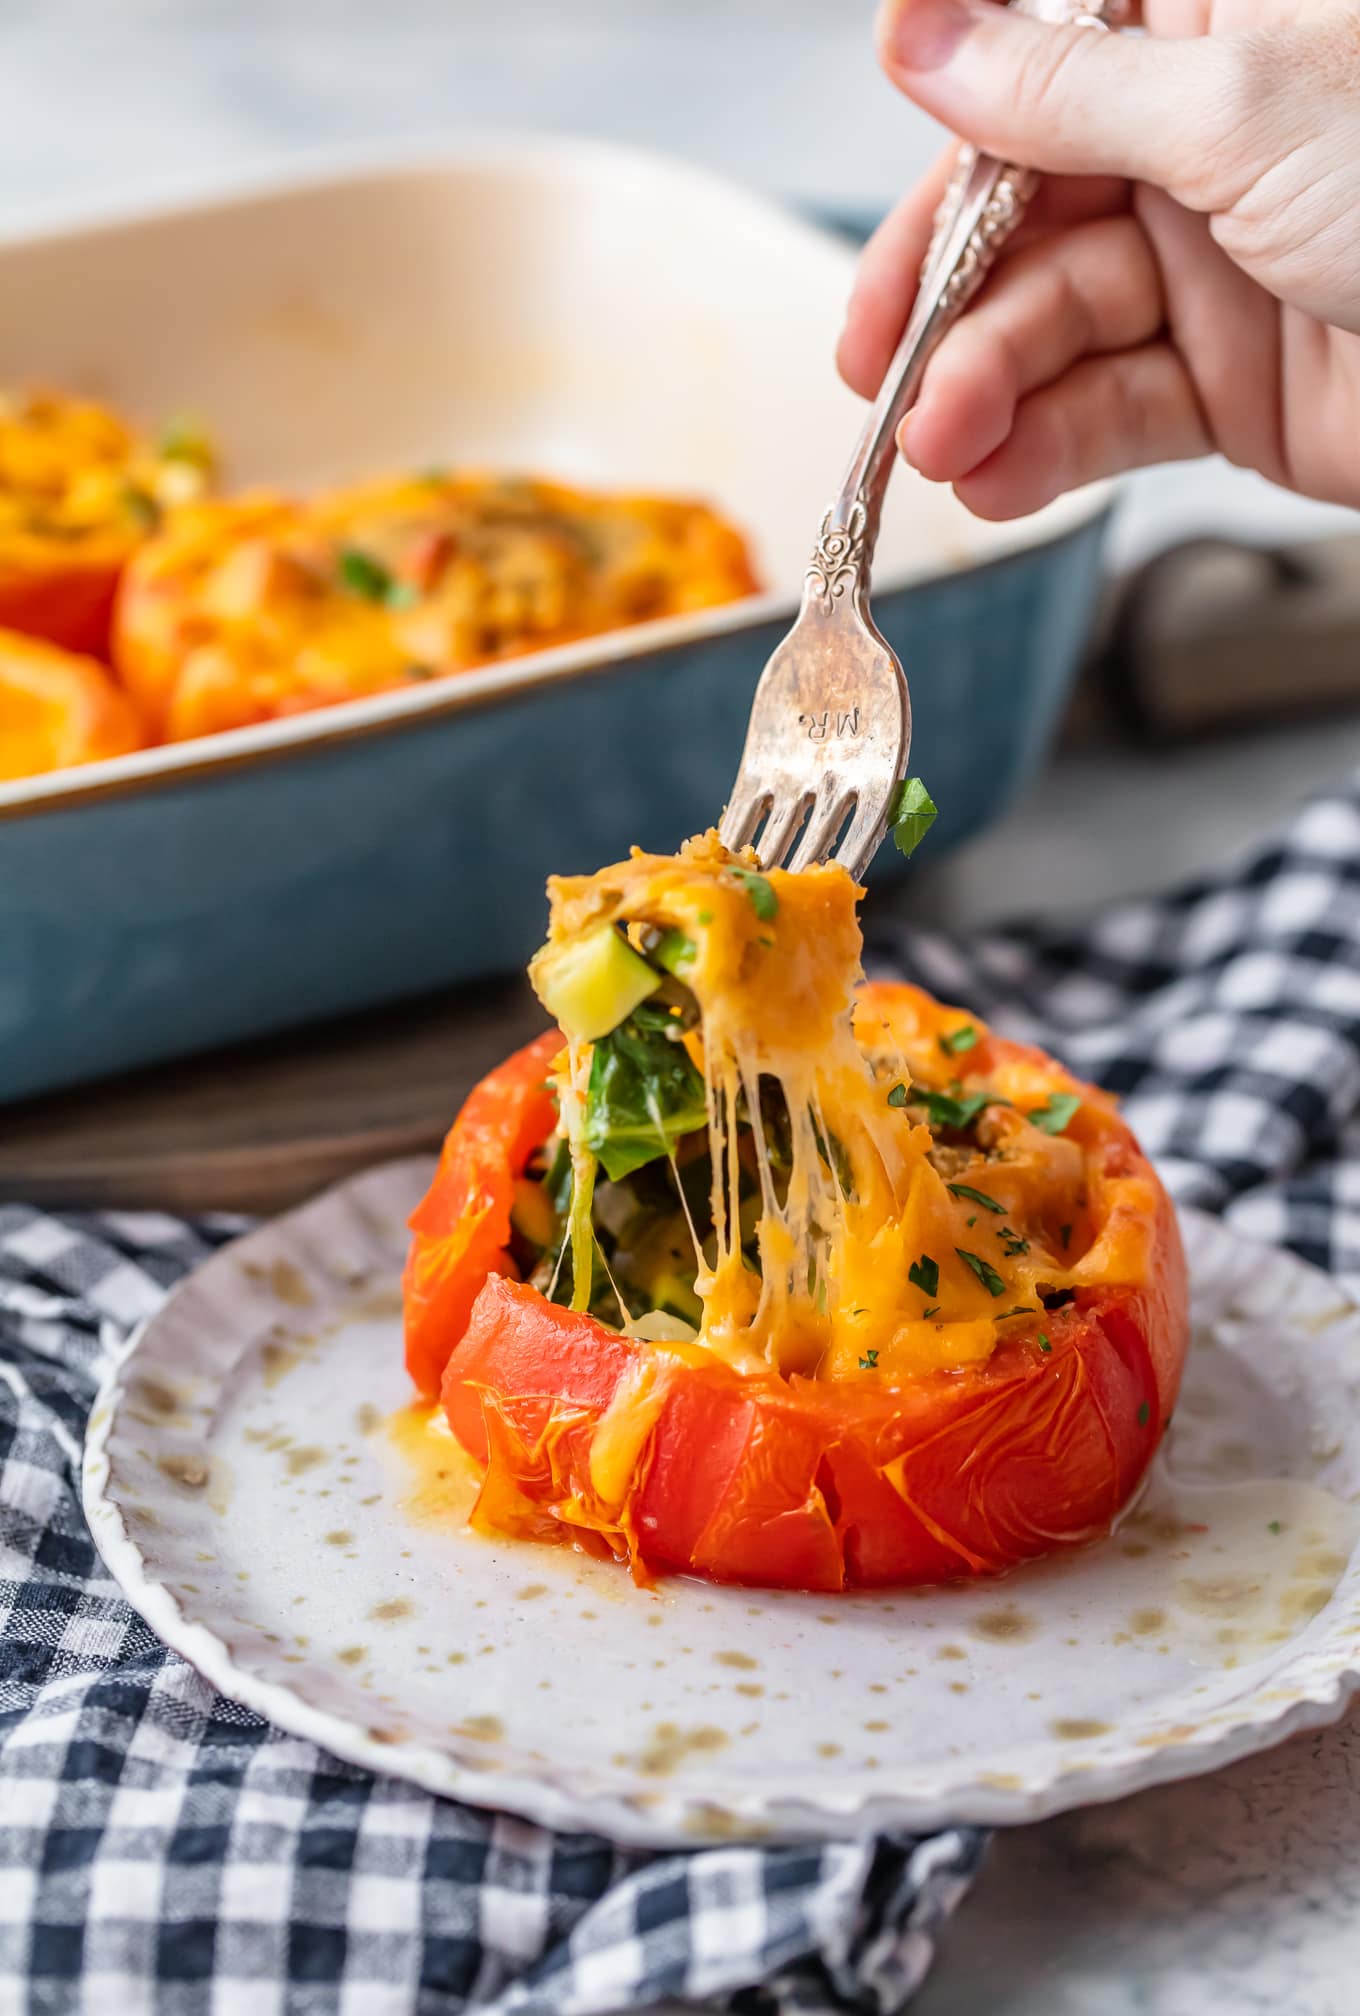 shot of stuffed tomato with hand using a fork to pull out stuffing